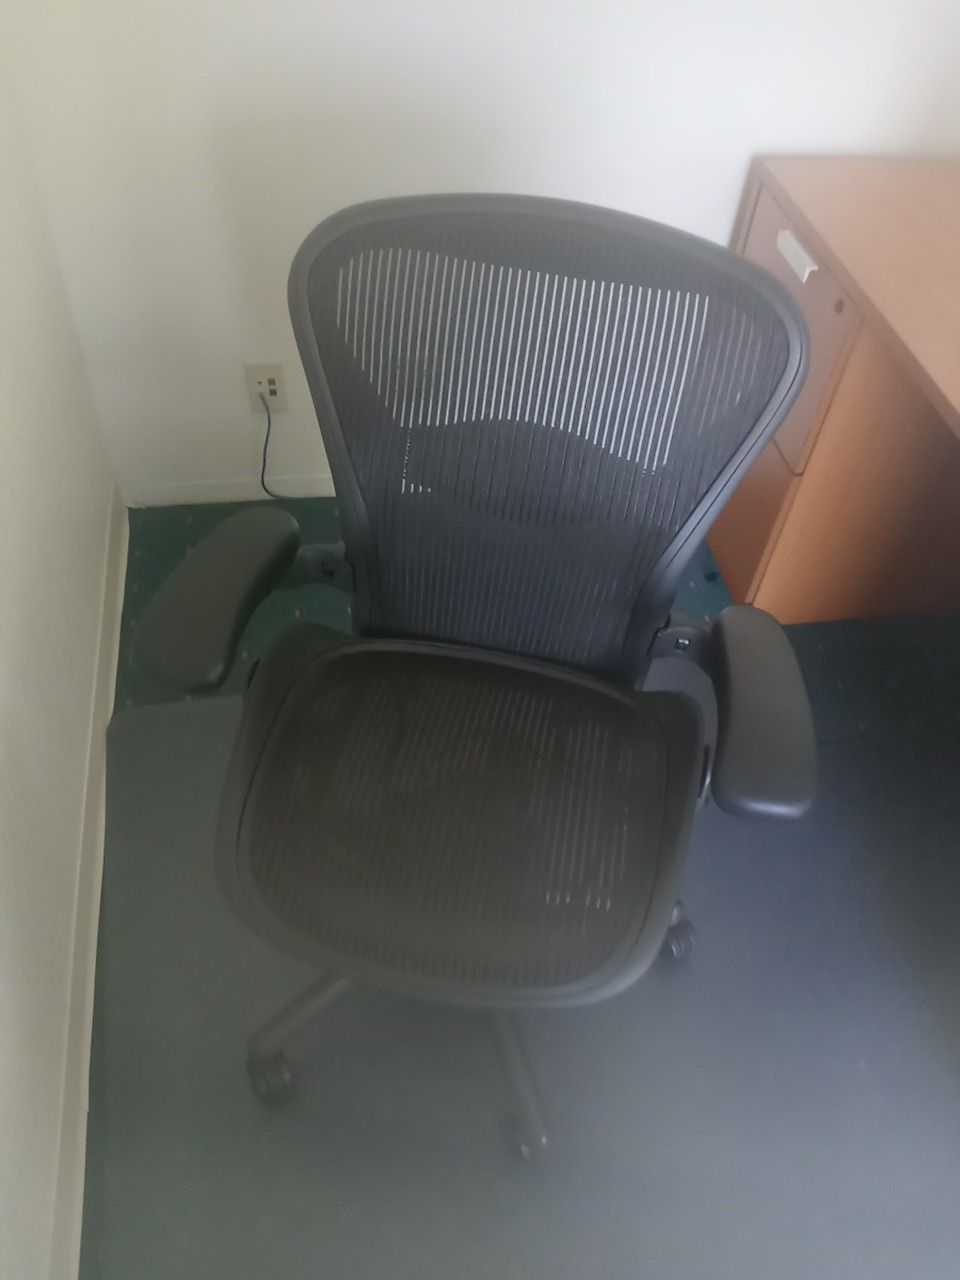 Office chairs great condition. Conference room tables and chairs. Leather seats. Great for starting office. Great deals must go!